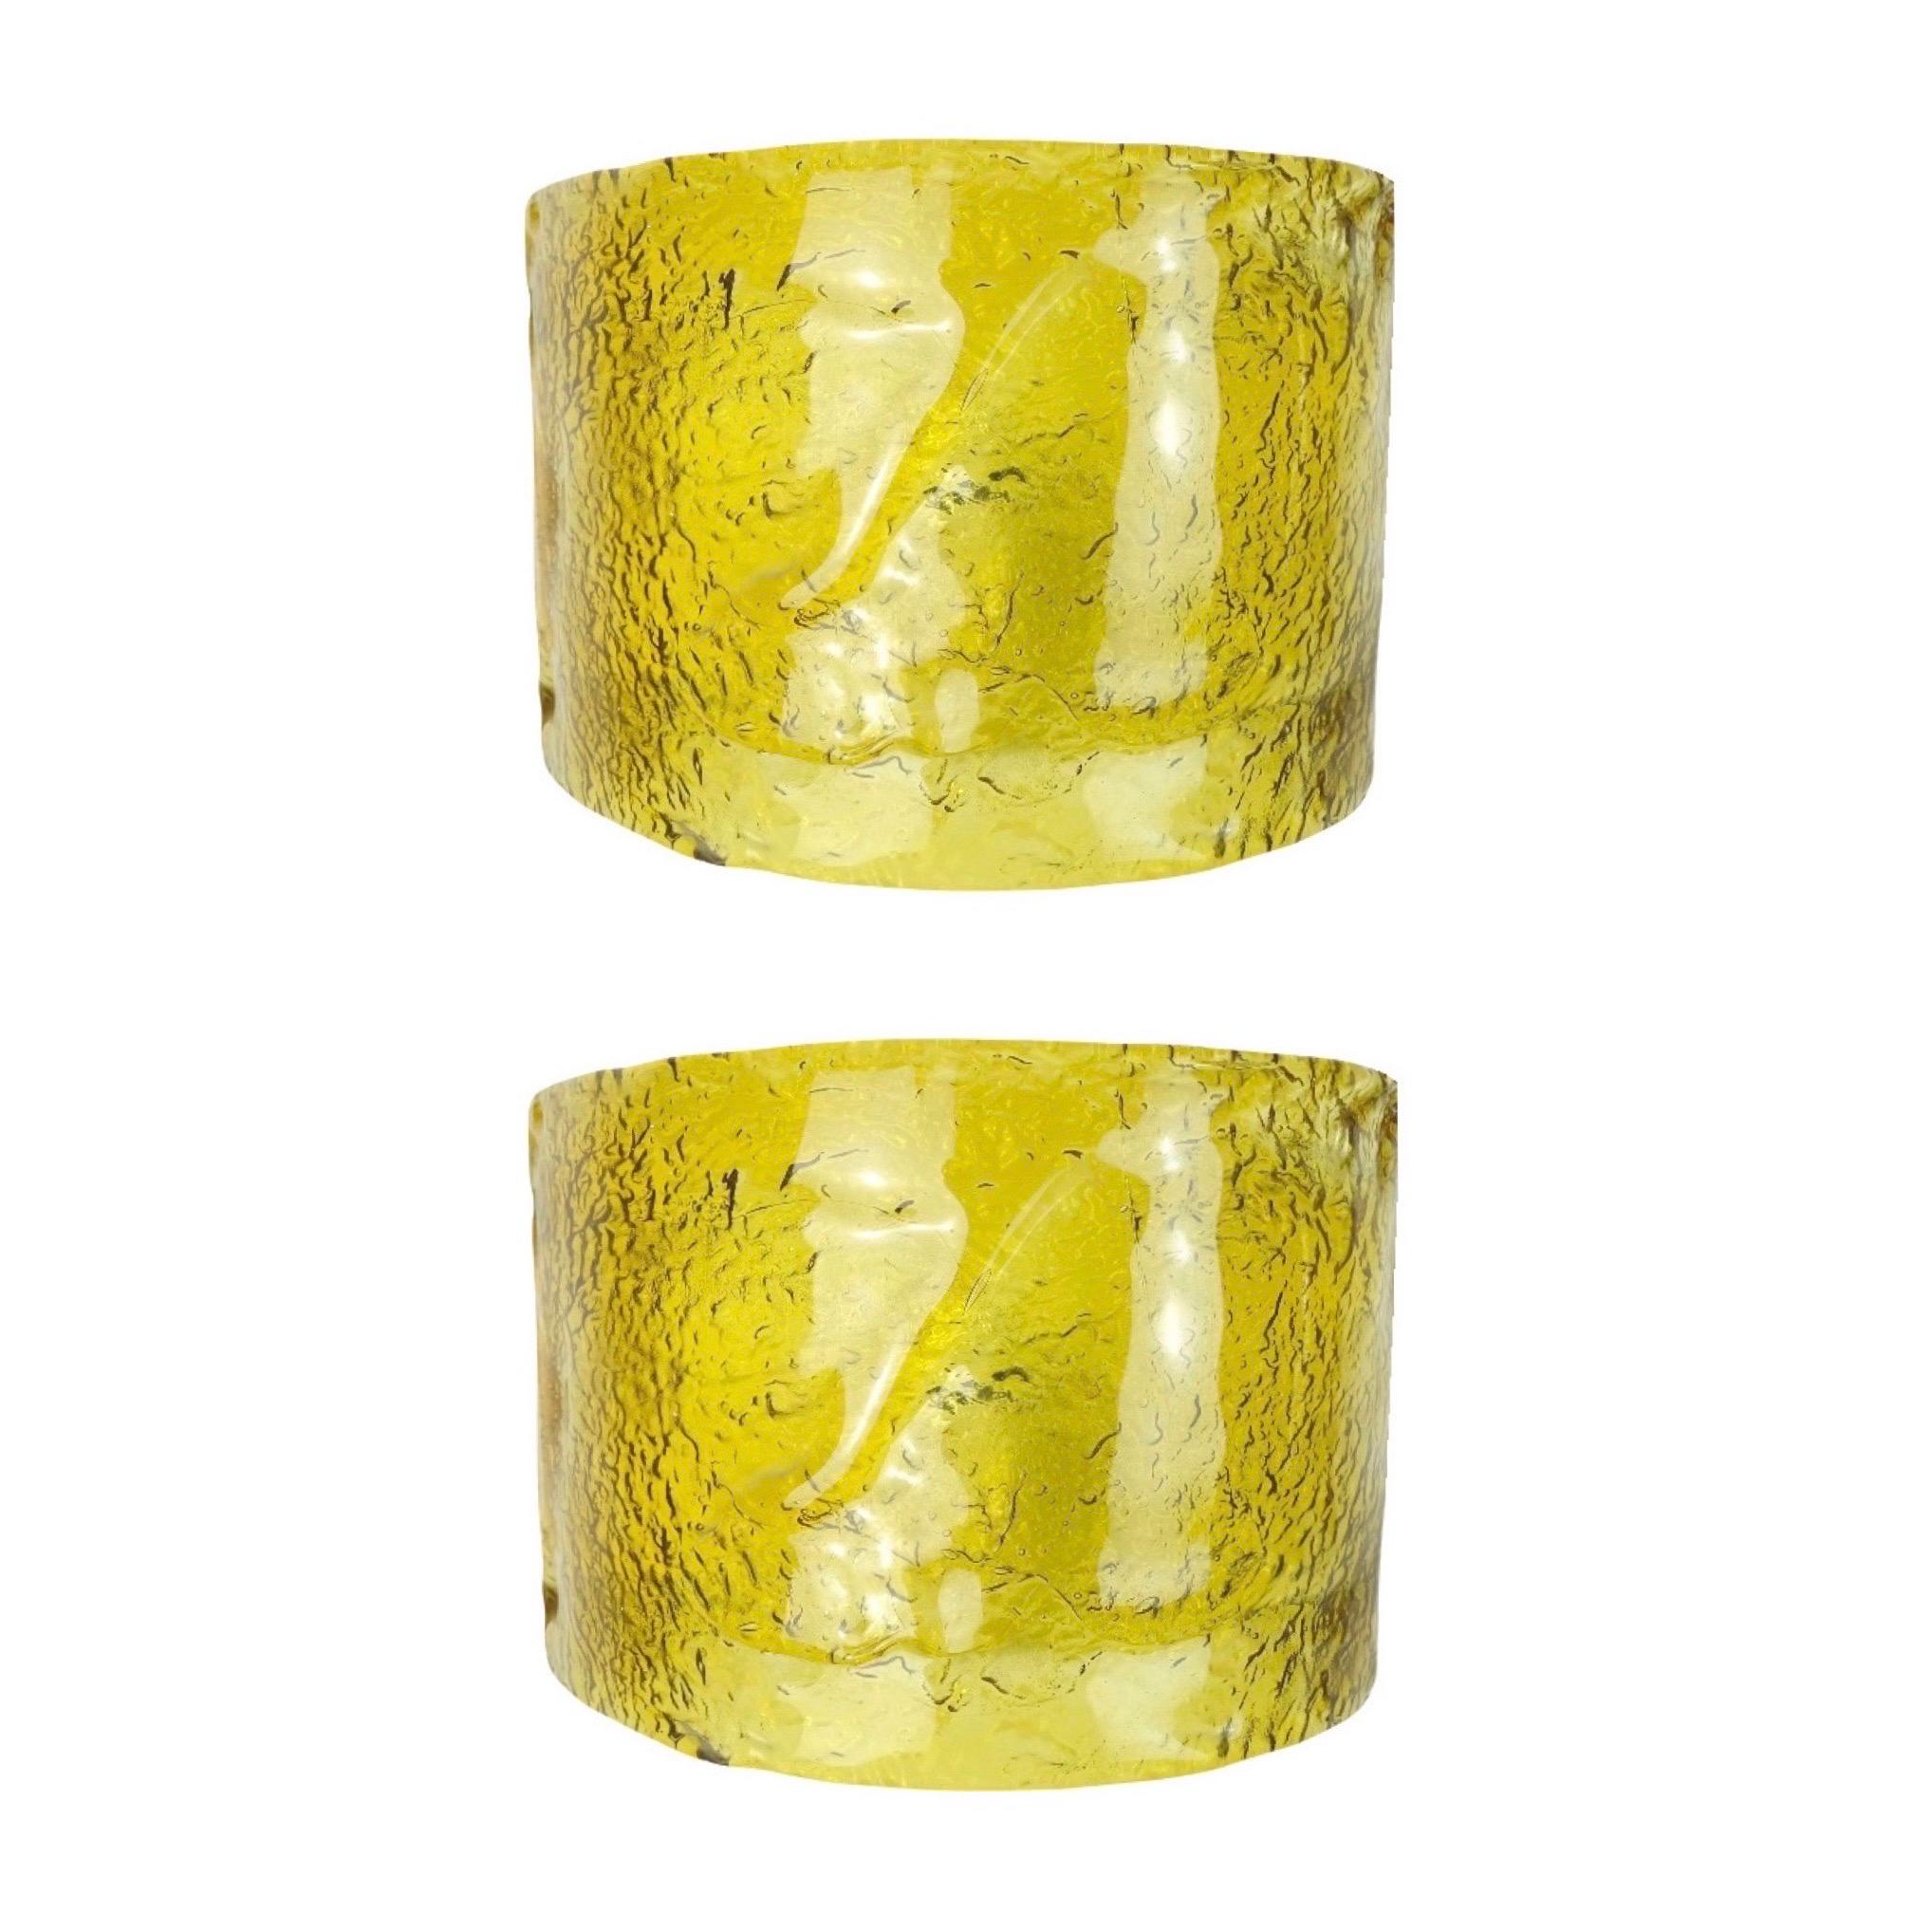 Cool, beautiful and unique Pair of Italian Yellow Amabar Murano glass Wall Sconces from 1970s by Carlo Nason.
These Sconces were made during the 1970s in Italy for the Venice Company “AV Mazzega” by Carlo Nason as Designer.
“AVMazzega” original